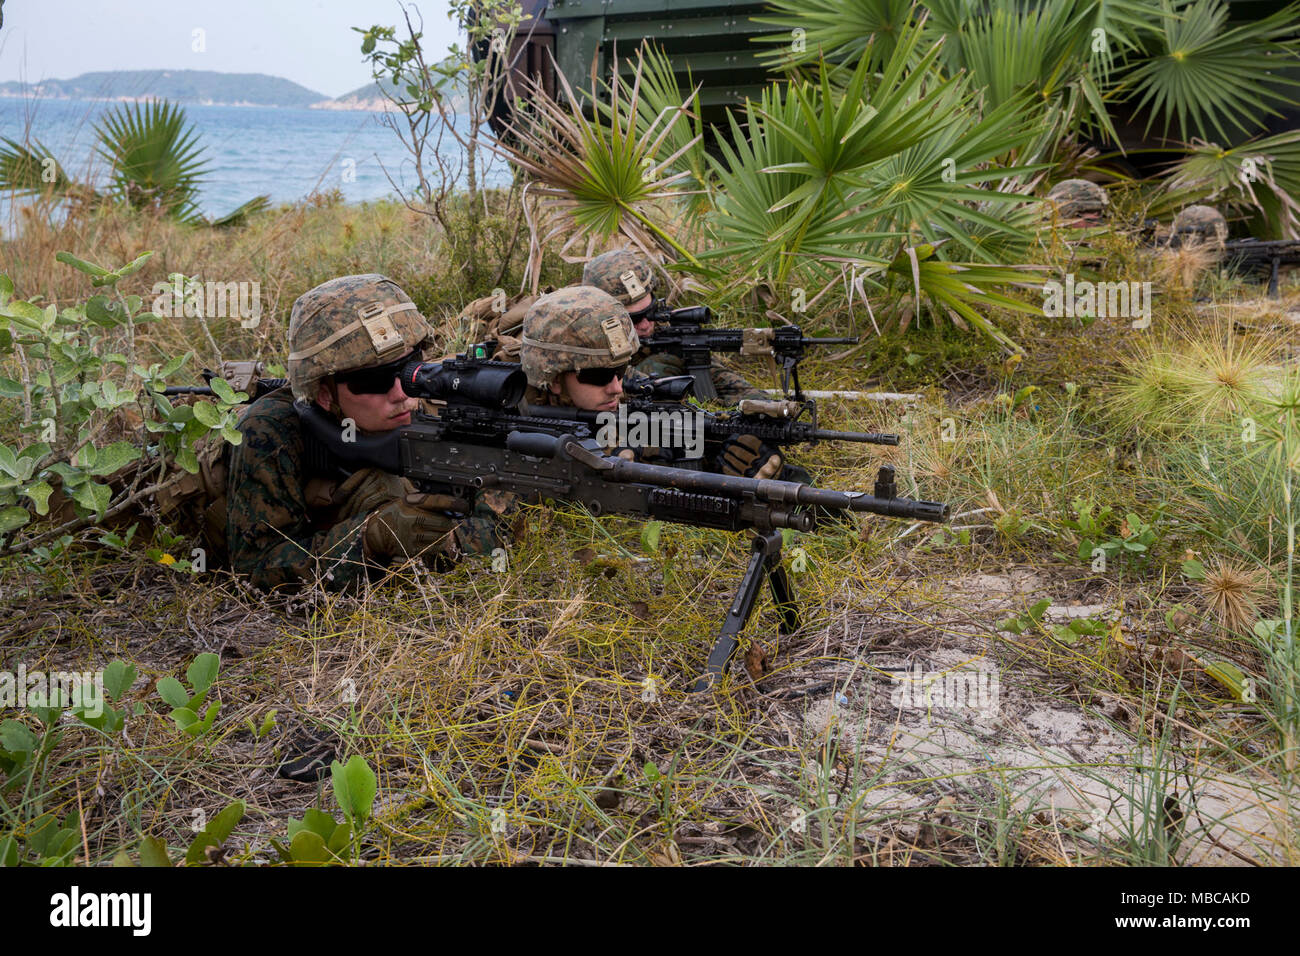 U.S. Marines with Kilo Company, 3rd Battalion, 3rd Marine Regiment, 3rd Marine Division post security during amphibious operations for Exercise Cobra Gold 2018, in the Kingdom of Thailand, Feb. 17, 2018. Cobra Gold 18 is an annual exercise conducted in the Kingdom of Thailand from Feb. 13-23 with seven full participating nations. The Hawaii-based battalion is forward-deployed to Okinawa, Japan part of the unit deployment program. (U.S. Marine Corps Stock Photo